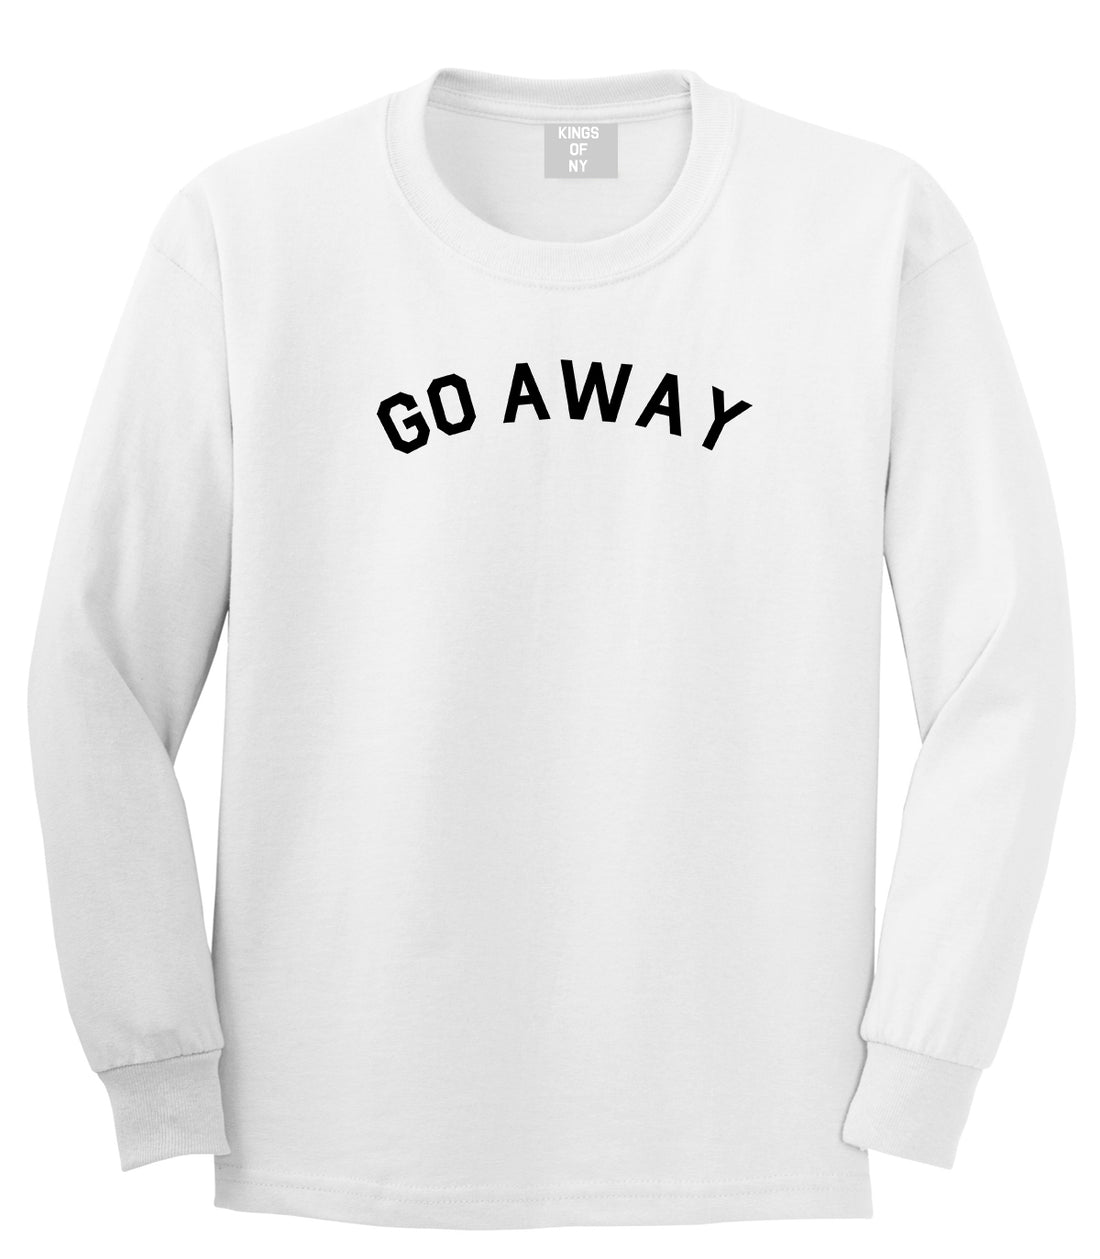 Go Away Mens White Long Sleeve T-Shirt by KINGS OF NY